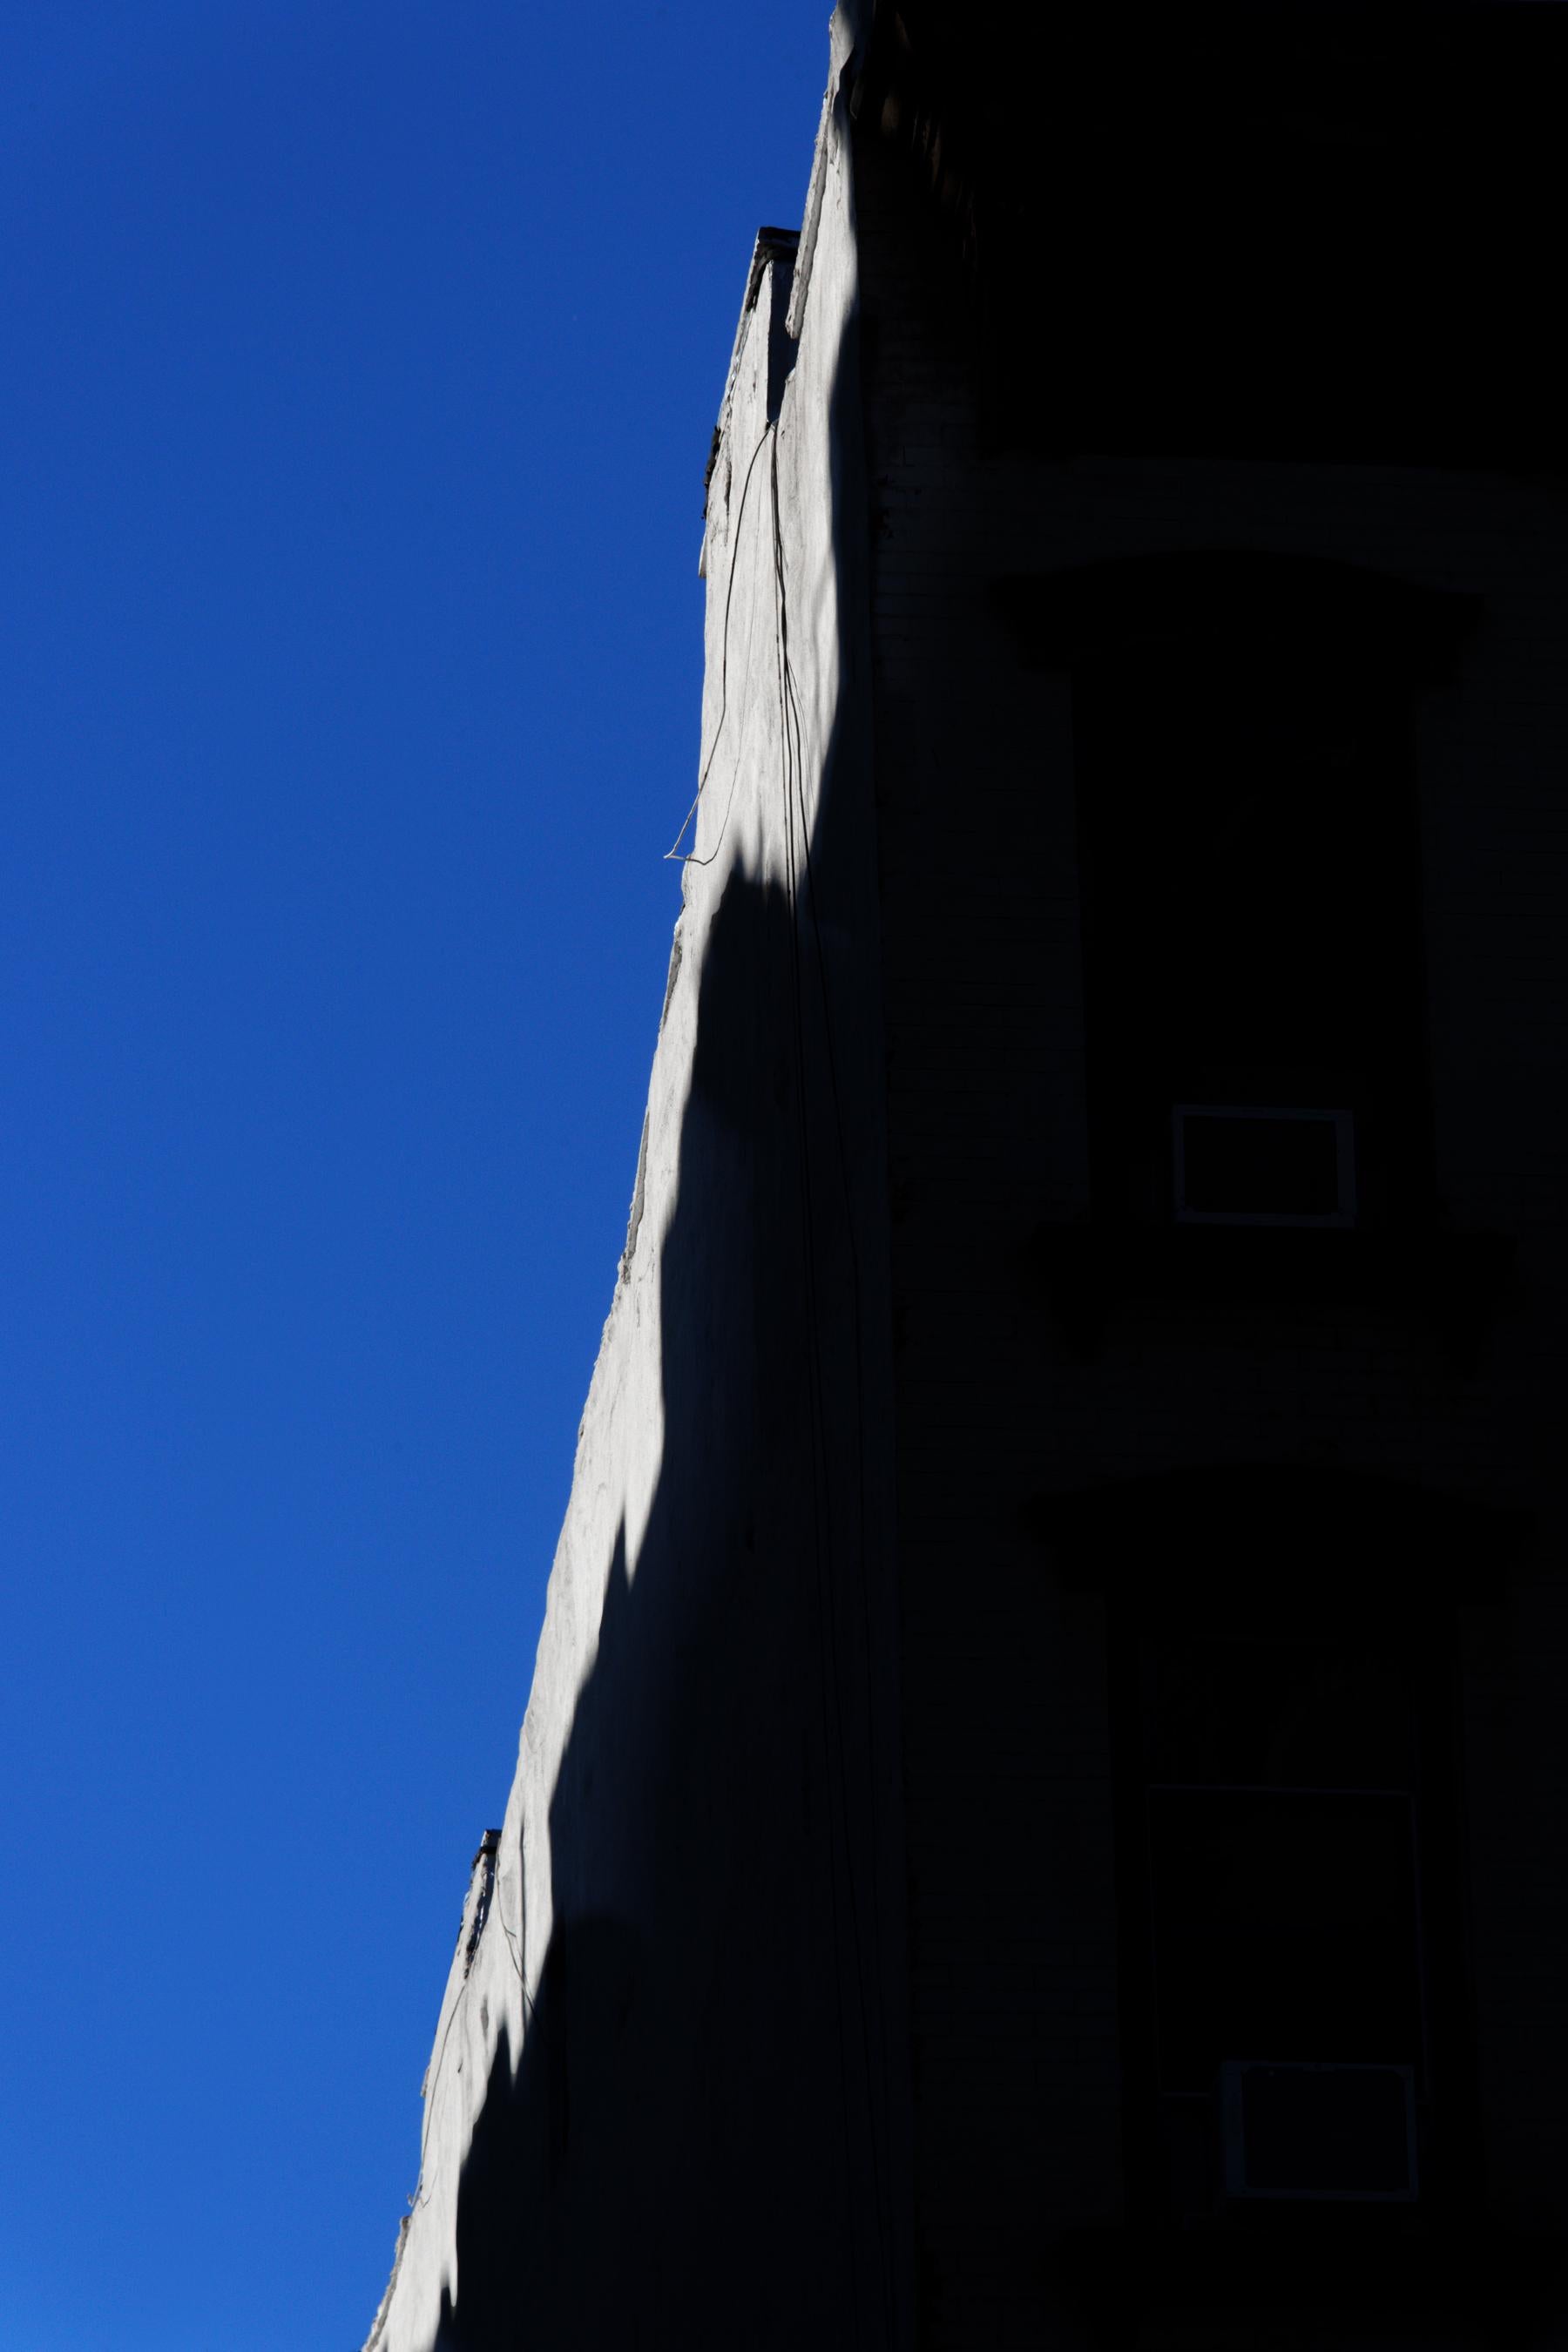 "East Village Abstract #2", photograph, city, architecture, roof, sky, edge blue